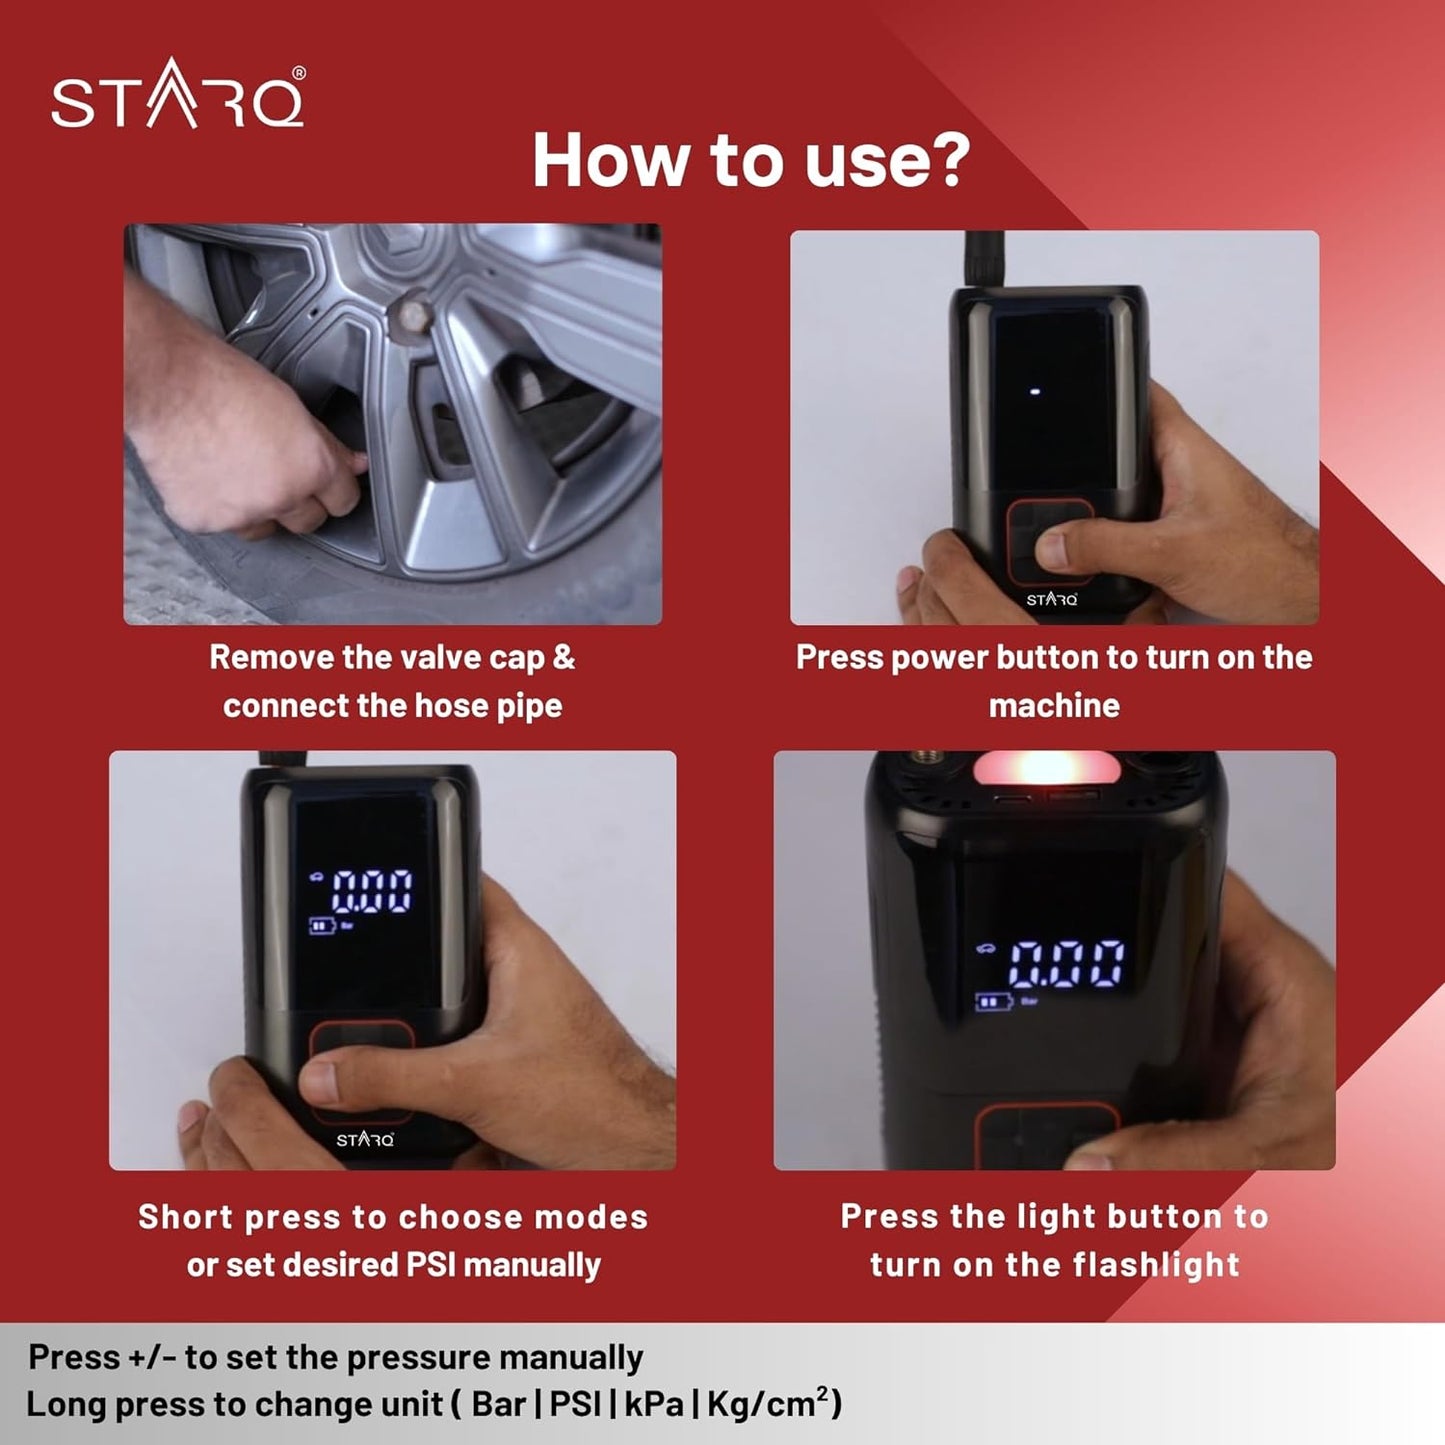 STARQ Inflate Pro Portable/Cordless Tyre Inflator/Air Compressor with Digital Display|4000mAh Battery|for Cars, Motorcycles, Bicycles, Football| Upto 150 Psi| Flash Light|Power Bank (Inflate Pro)